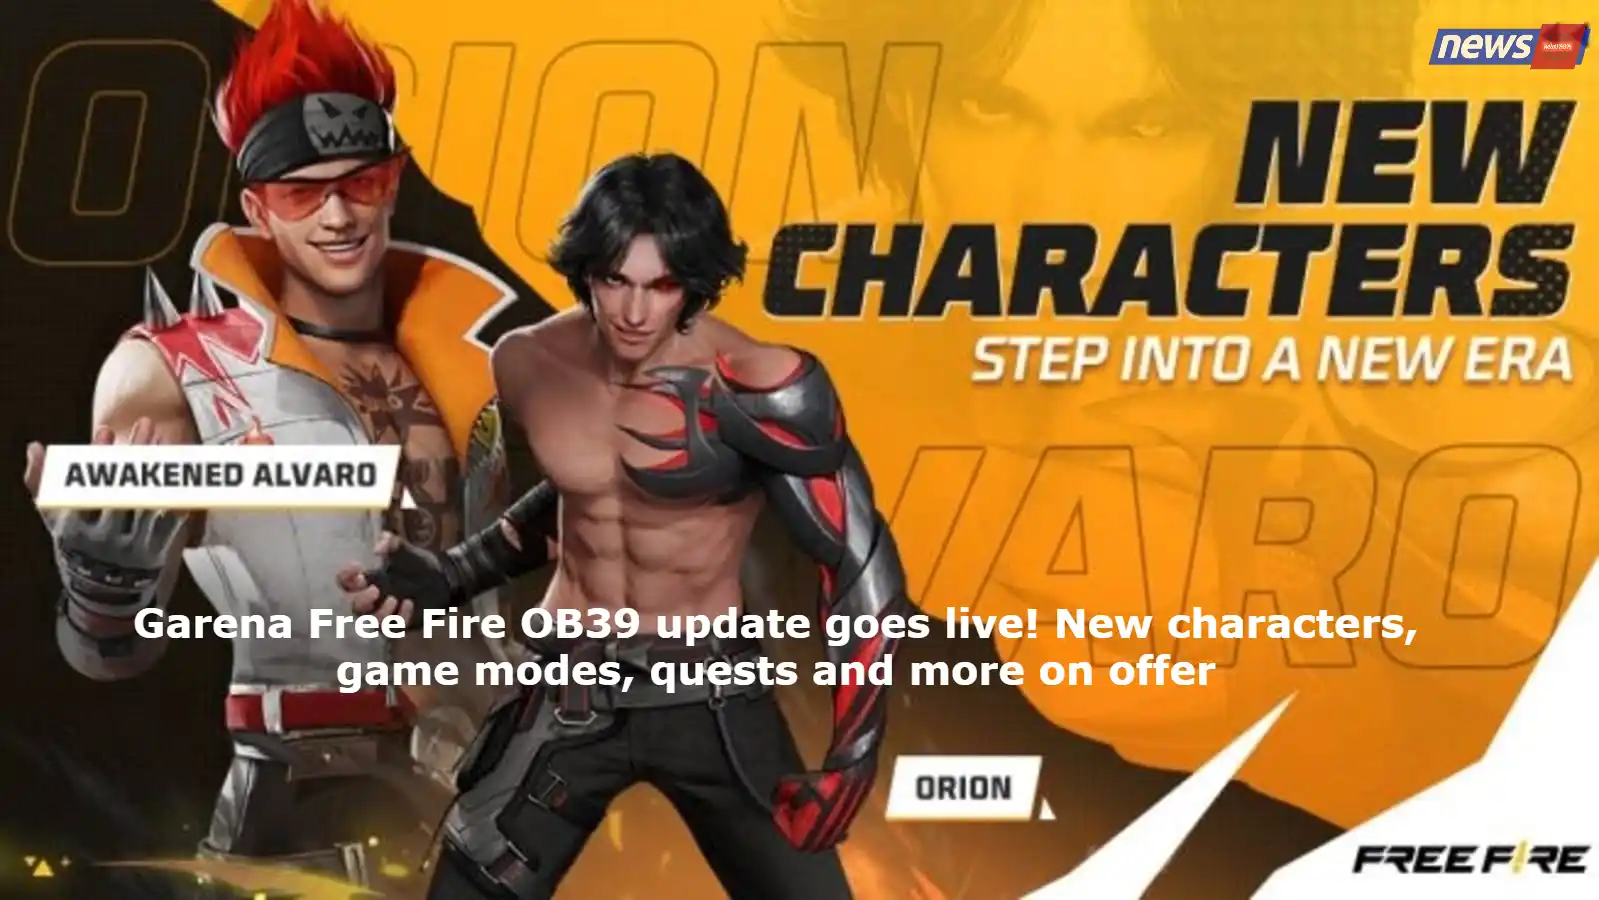 Garena Free Fire OB39 update goes live! New characters, game modes, quests and more on offer